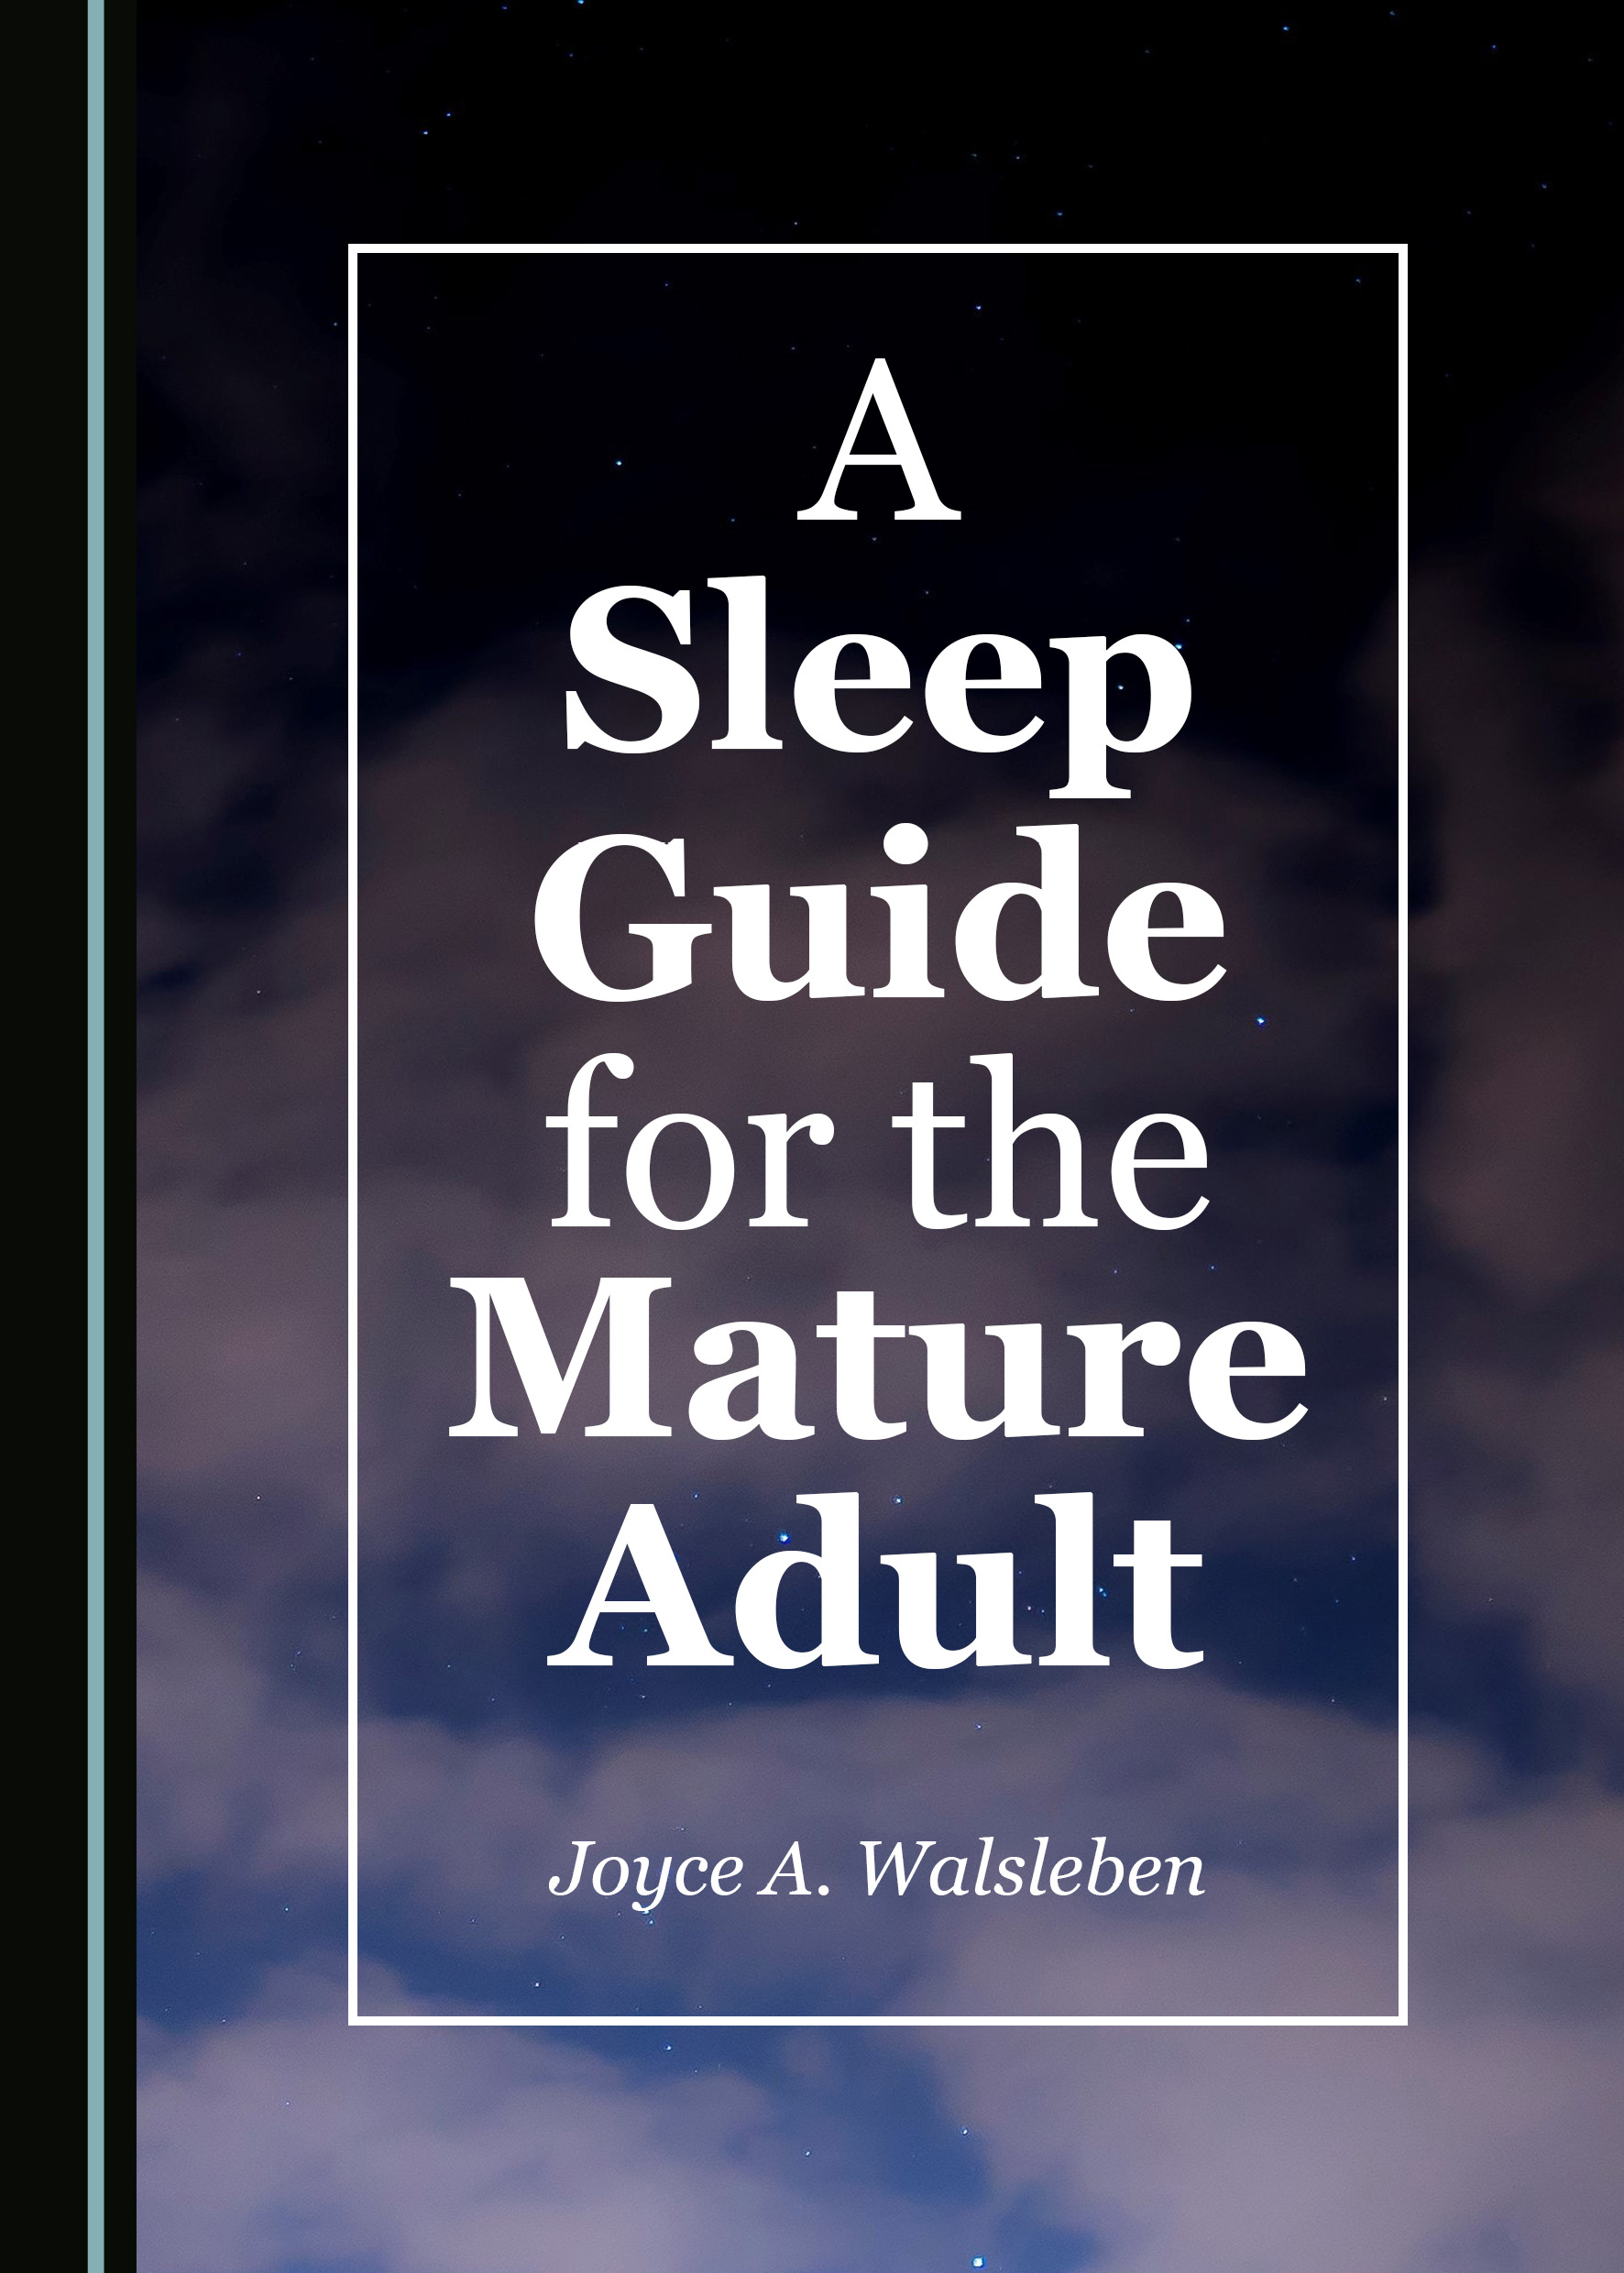 A Sleep Guide for the Mature Adult